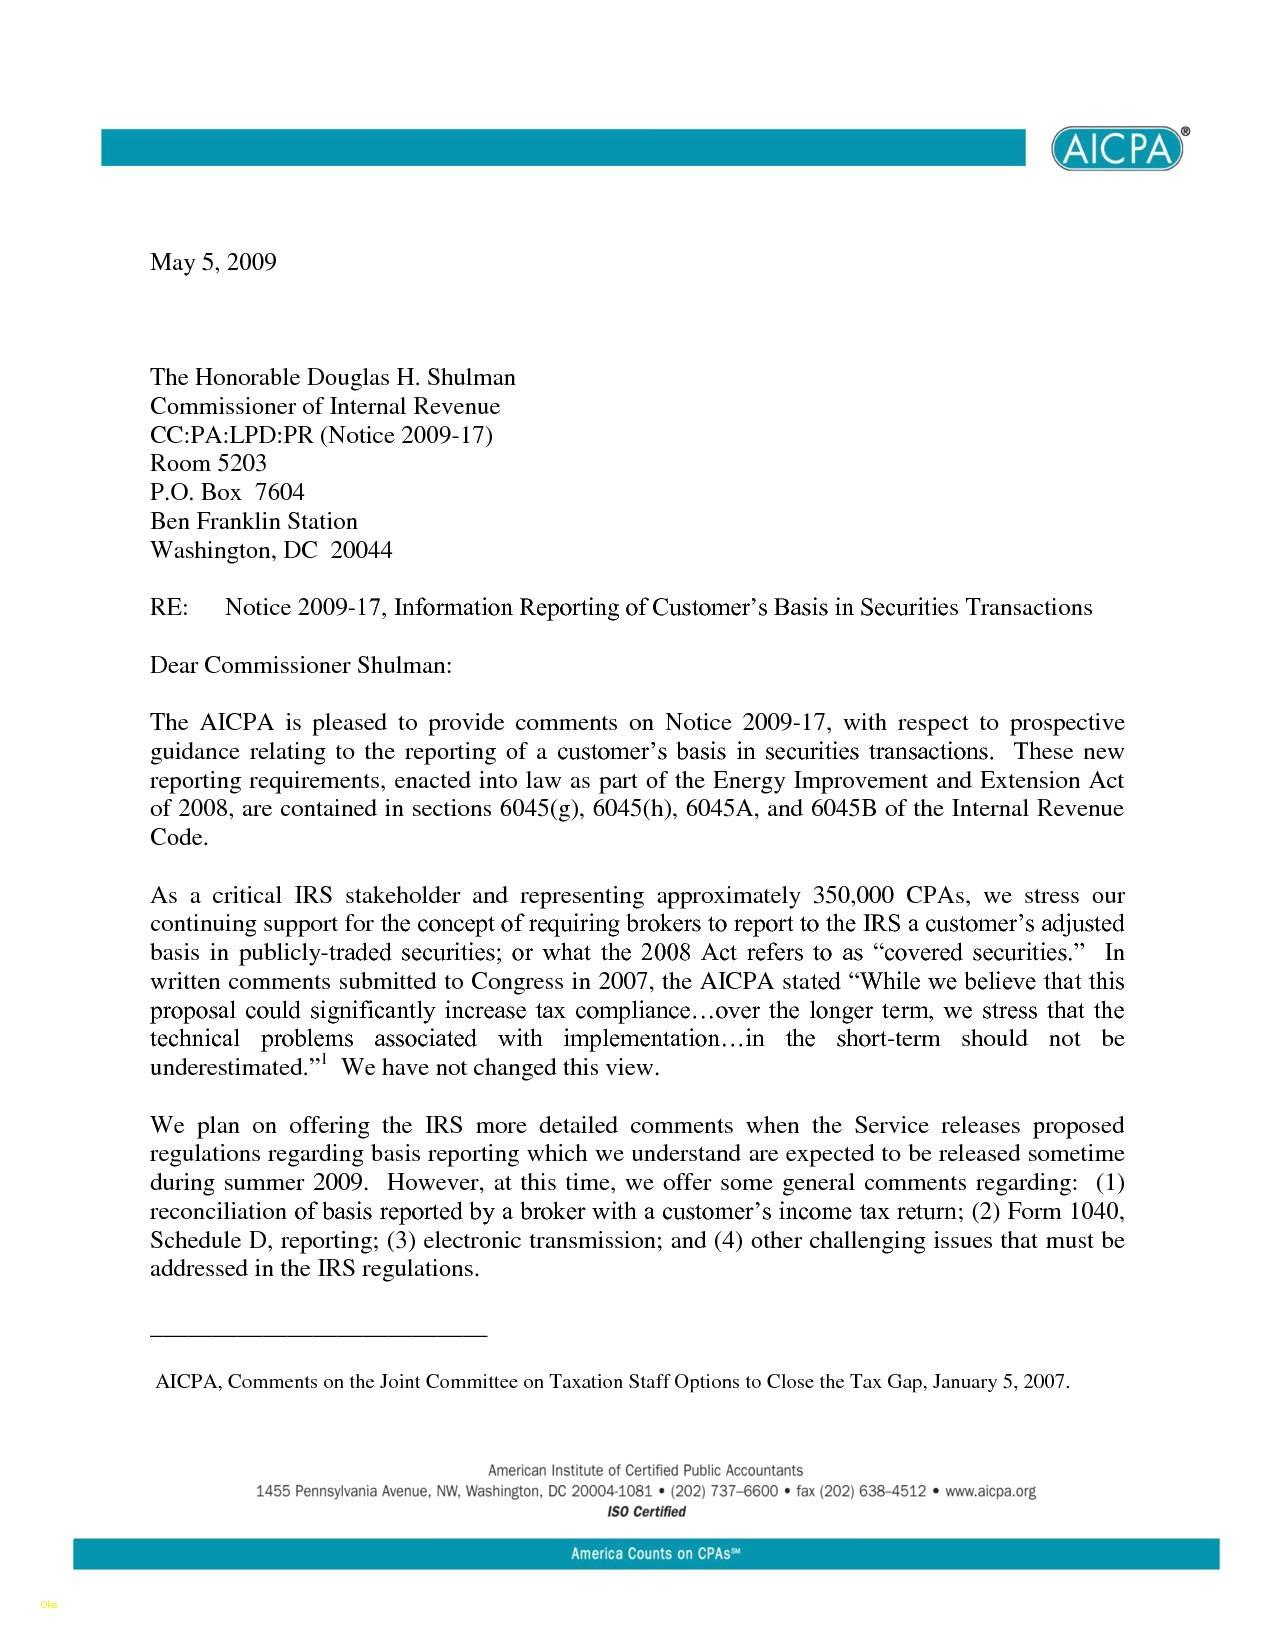 Irs Response Letter Template in Irs Response Letter Template